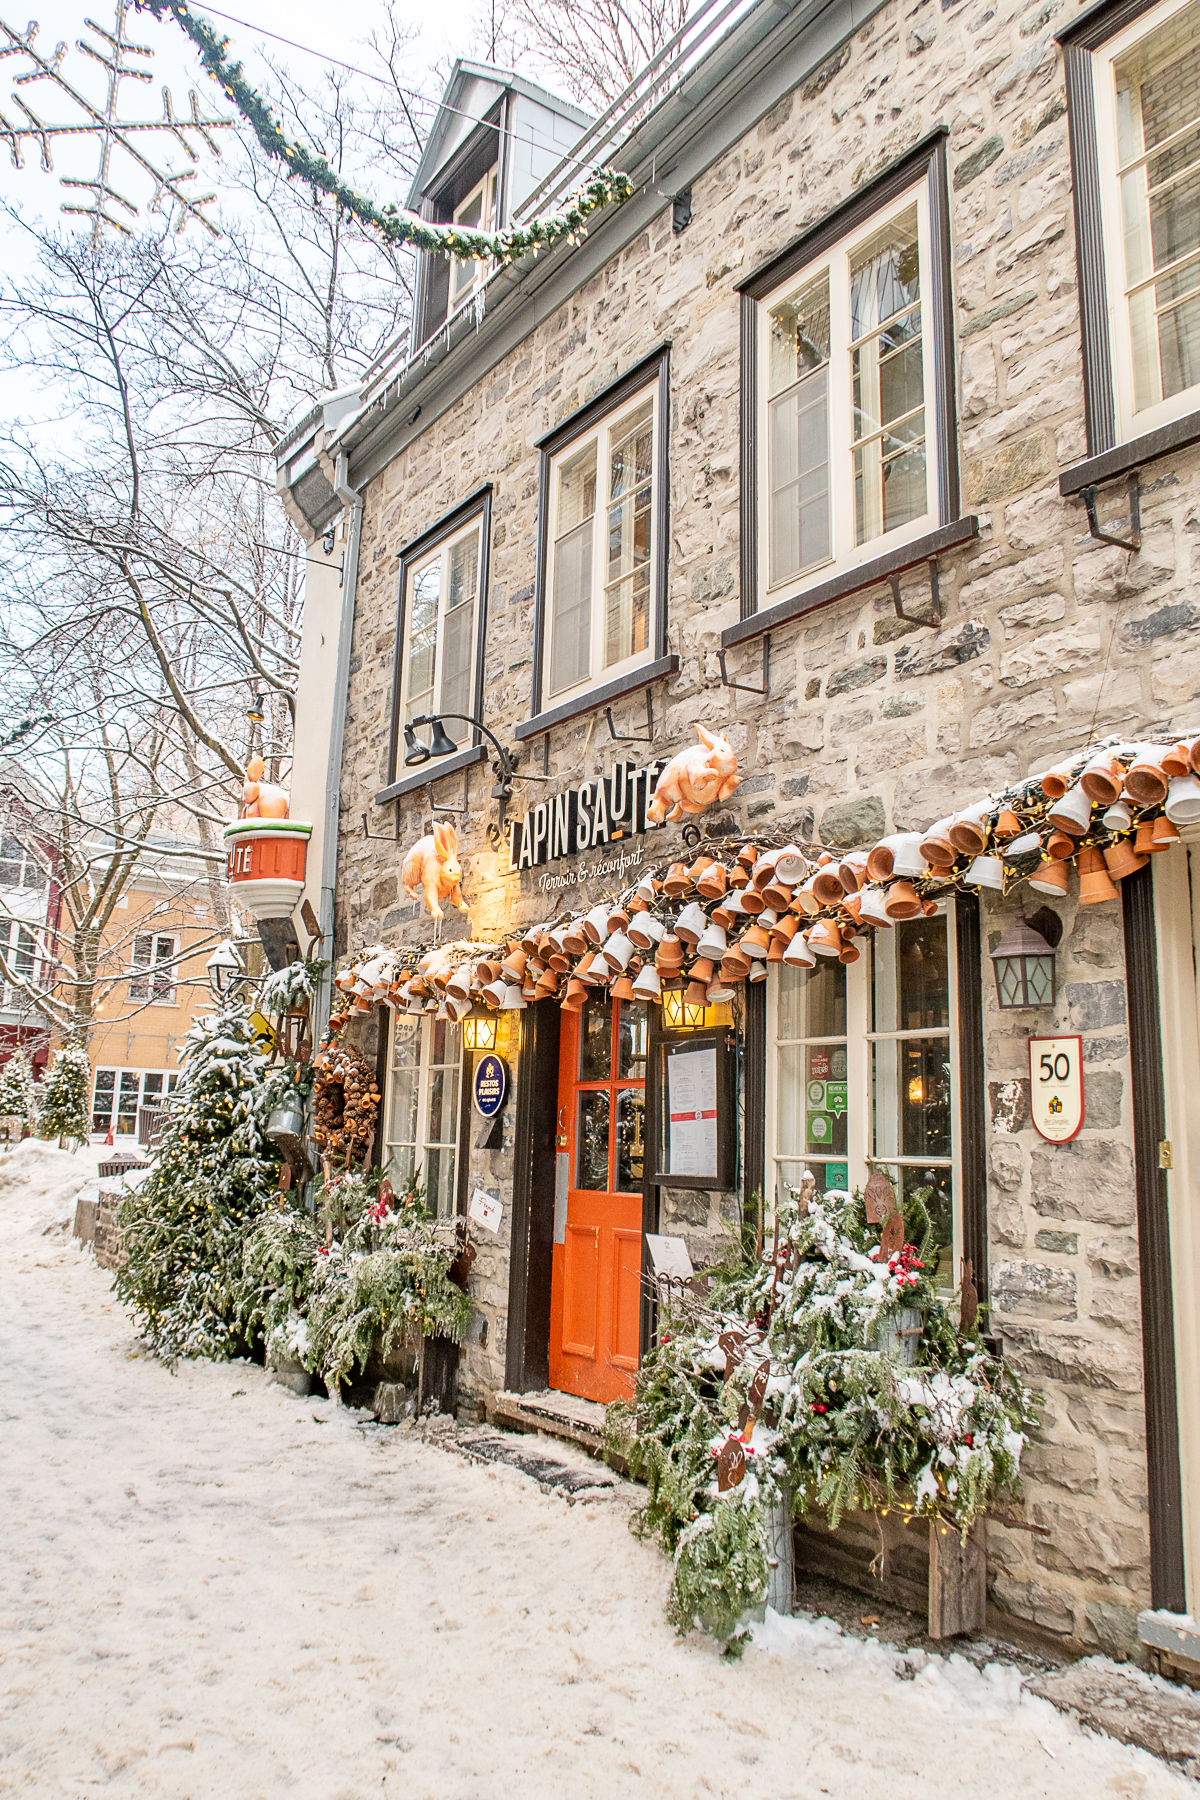 11 Foods to Try in Quebec City | What to Eat in Quebec City